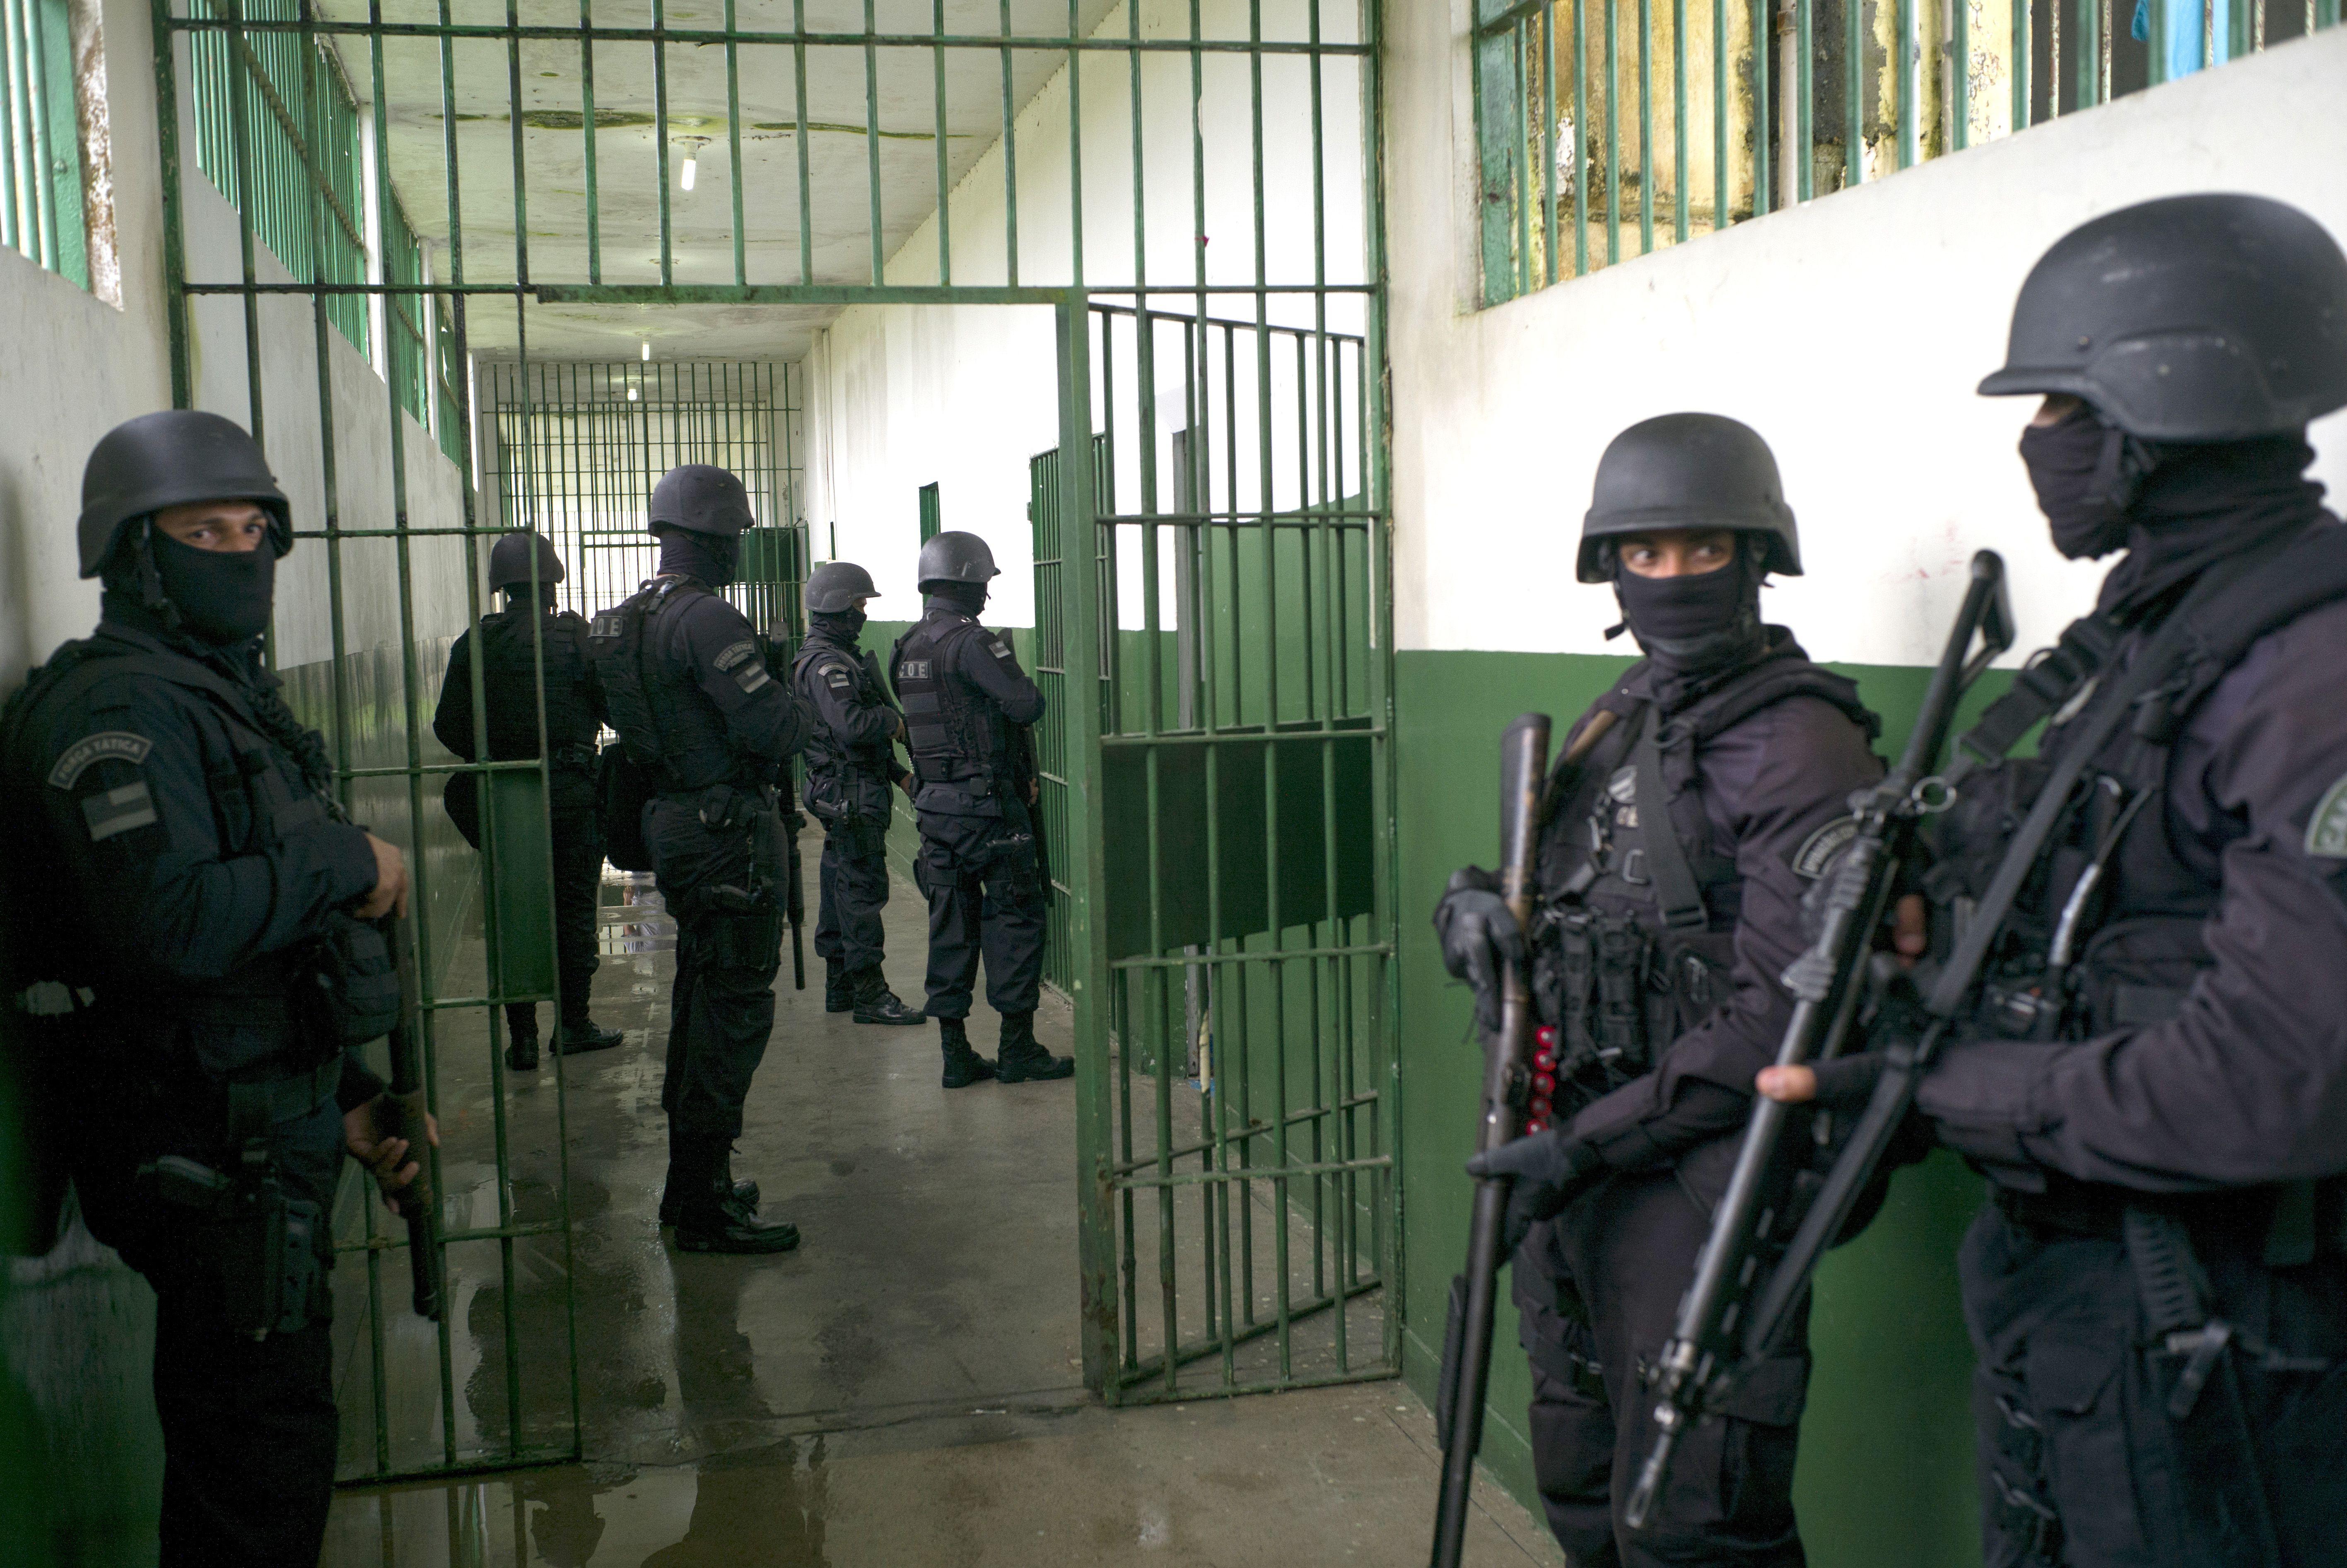 Brazil prison riot kills at least 56 in as state - BBC News